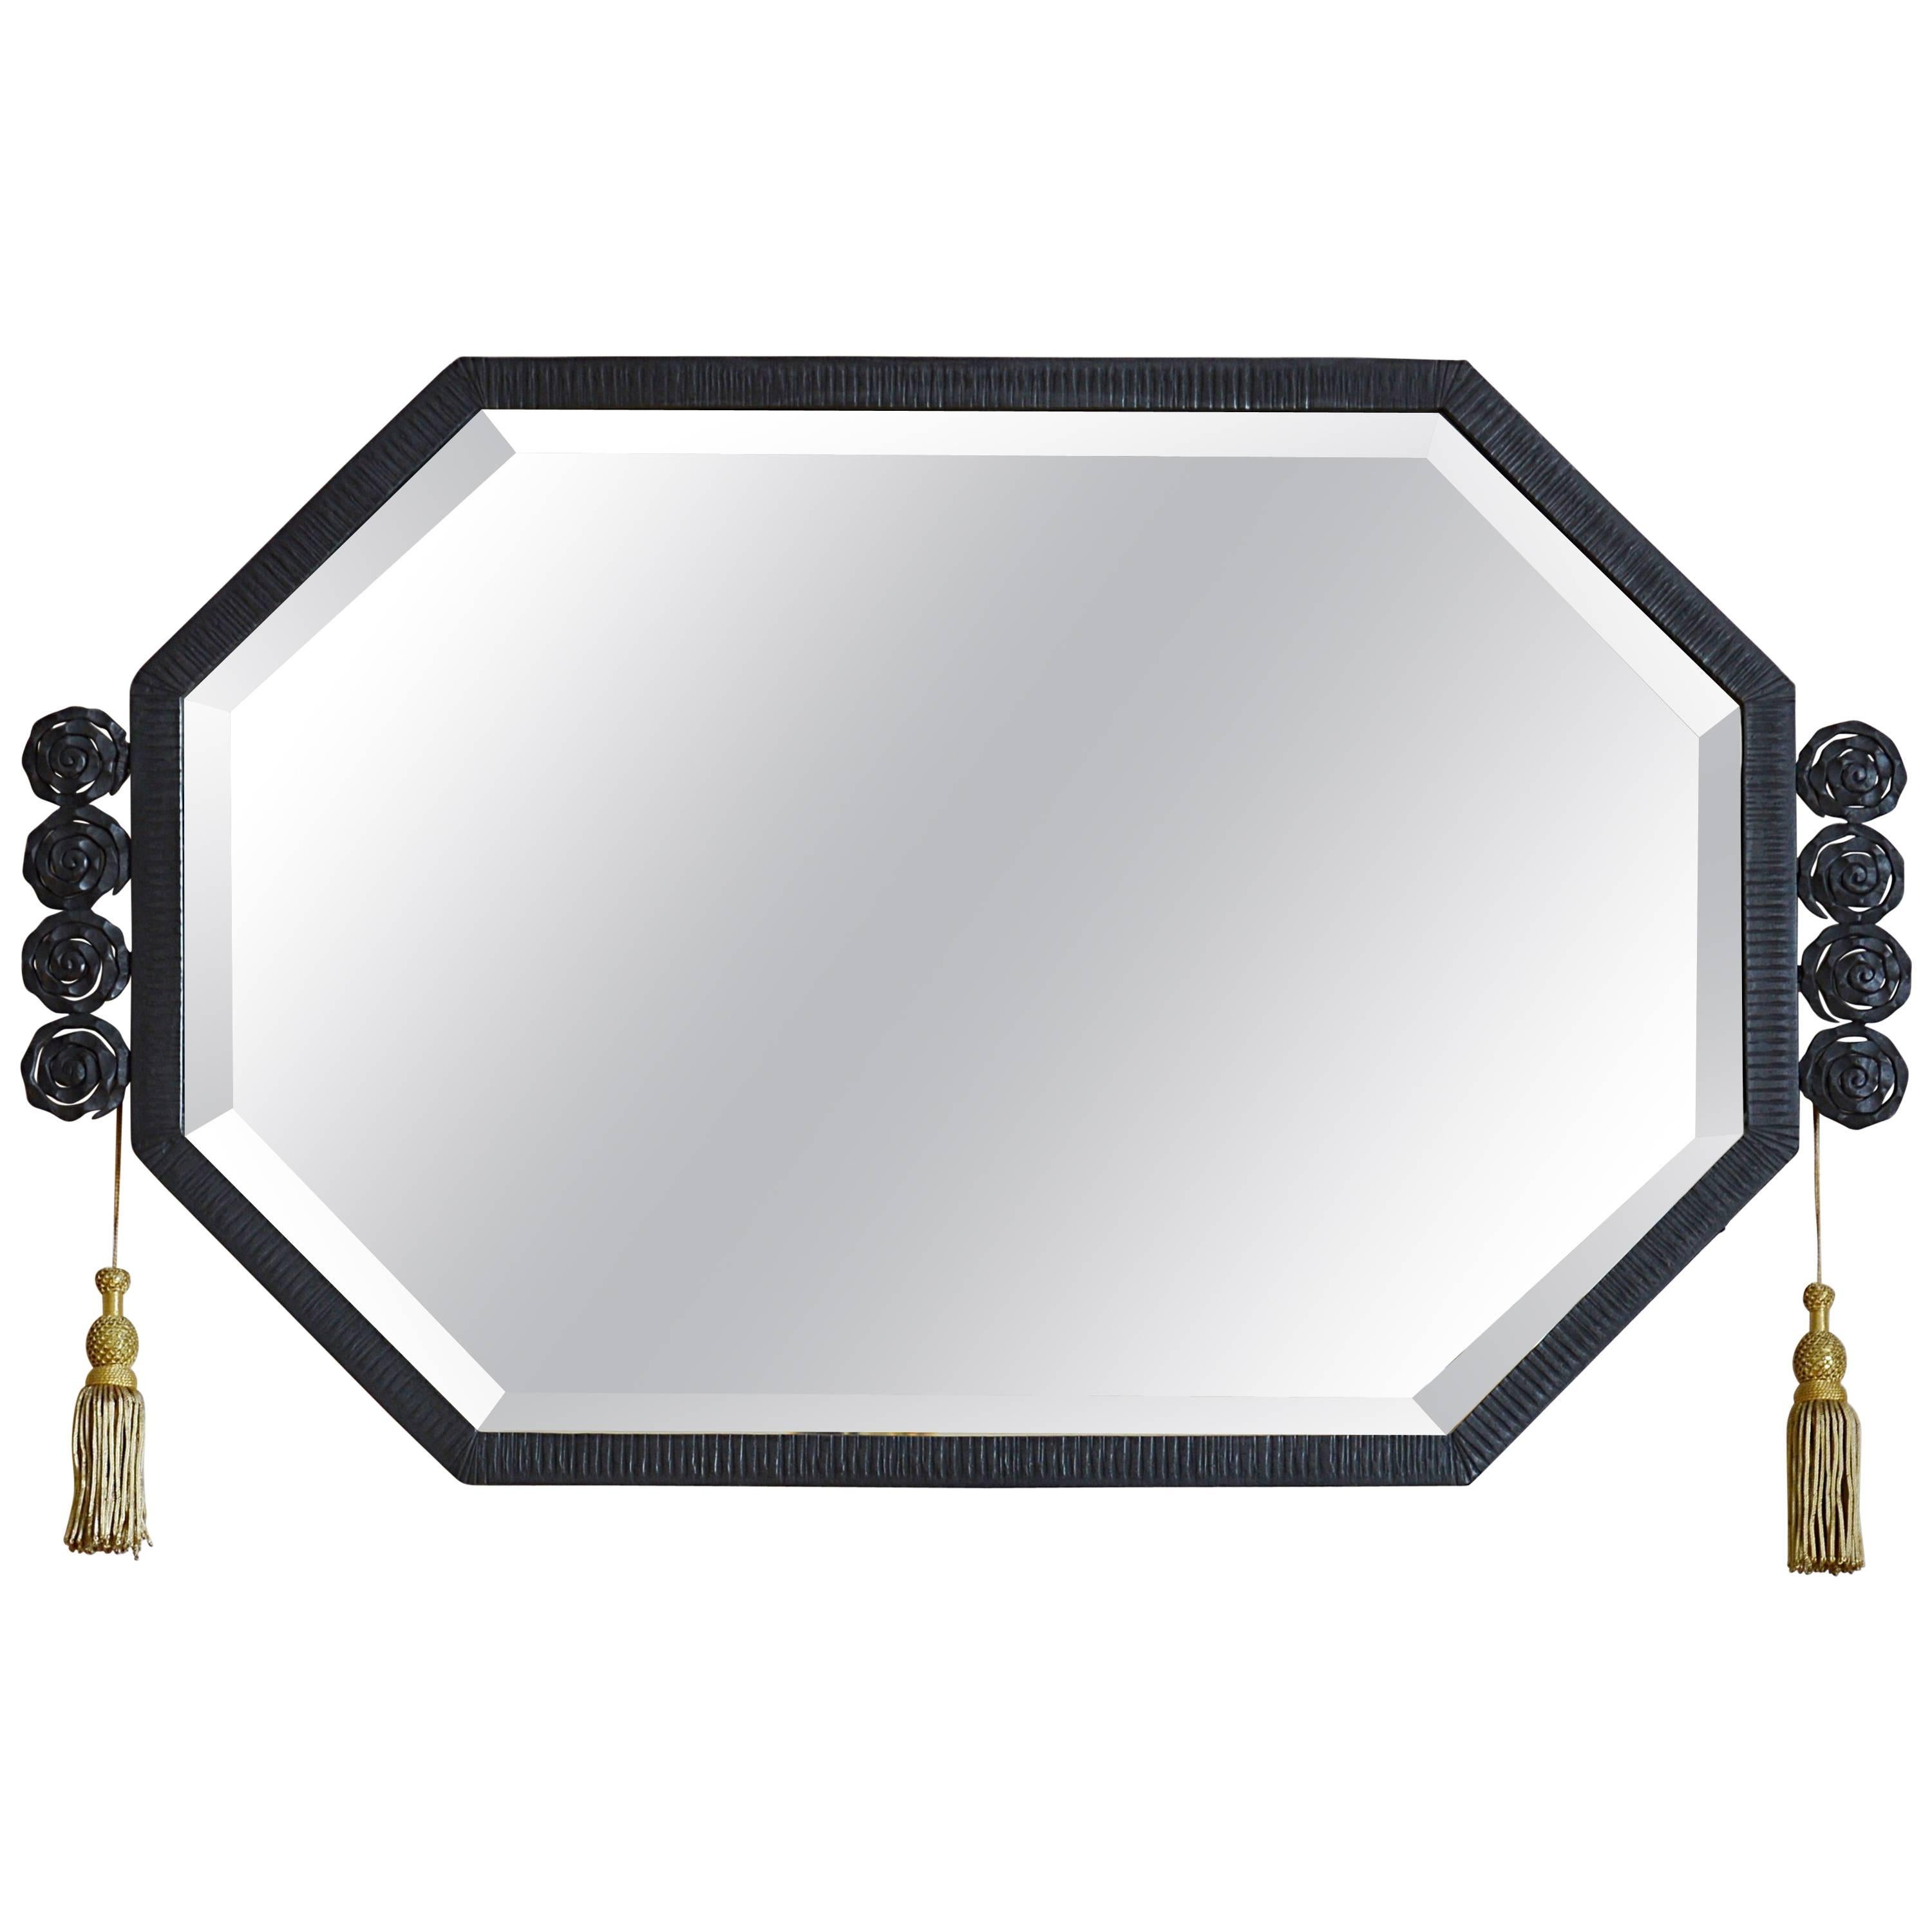 Large French Art Deco Wrought-Iron Wall Mirror, Late 1920s